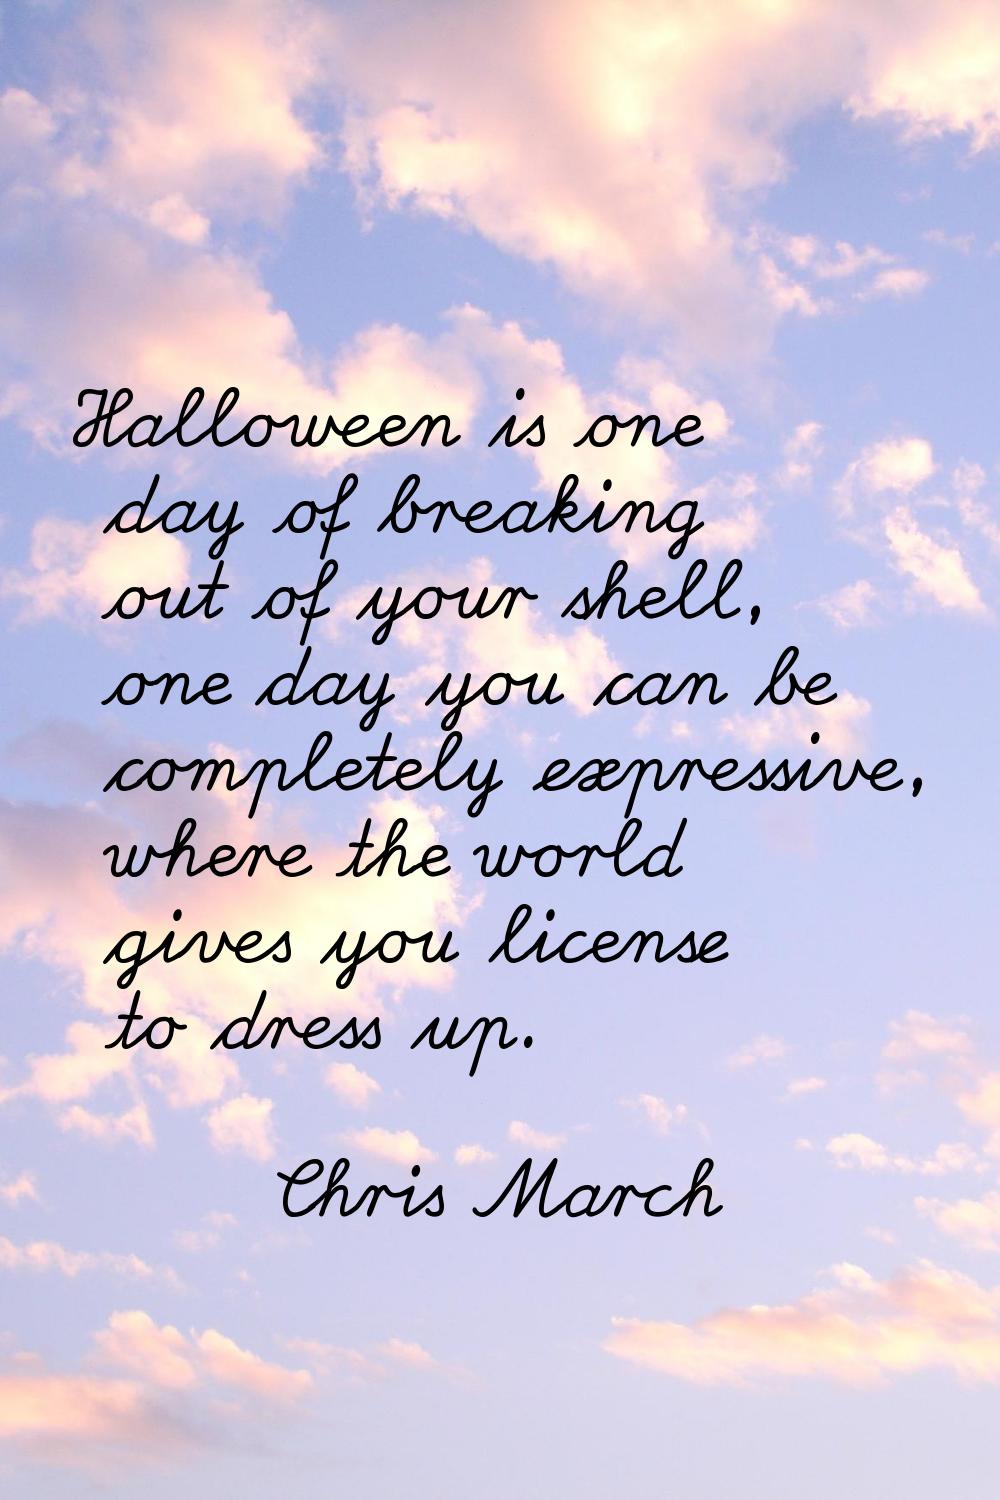 Halloween is one day of breaking out of your shell, one day you can be completely expressive, where